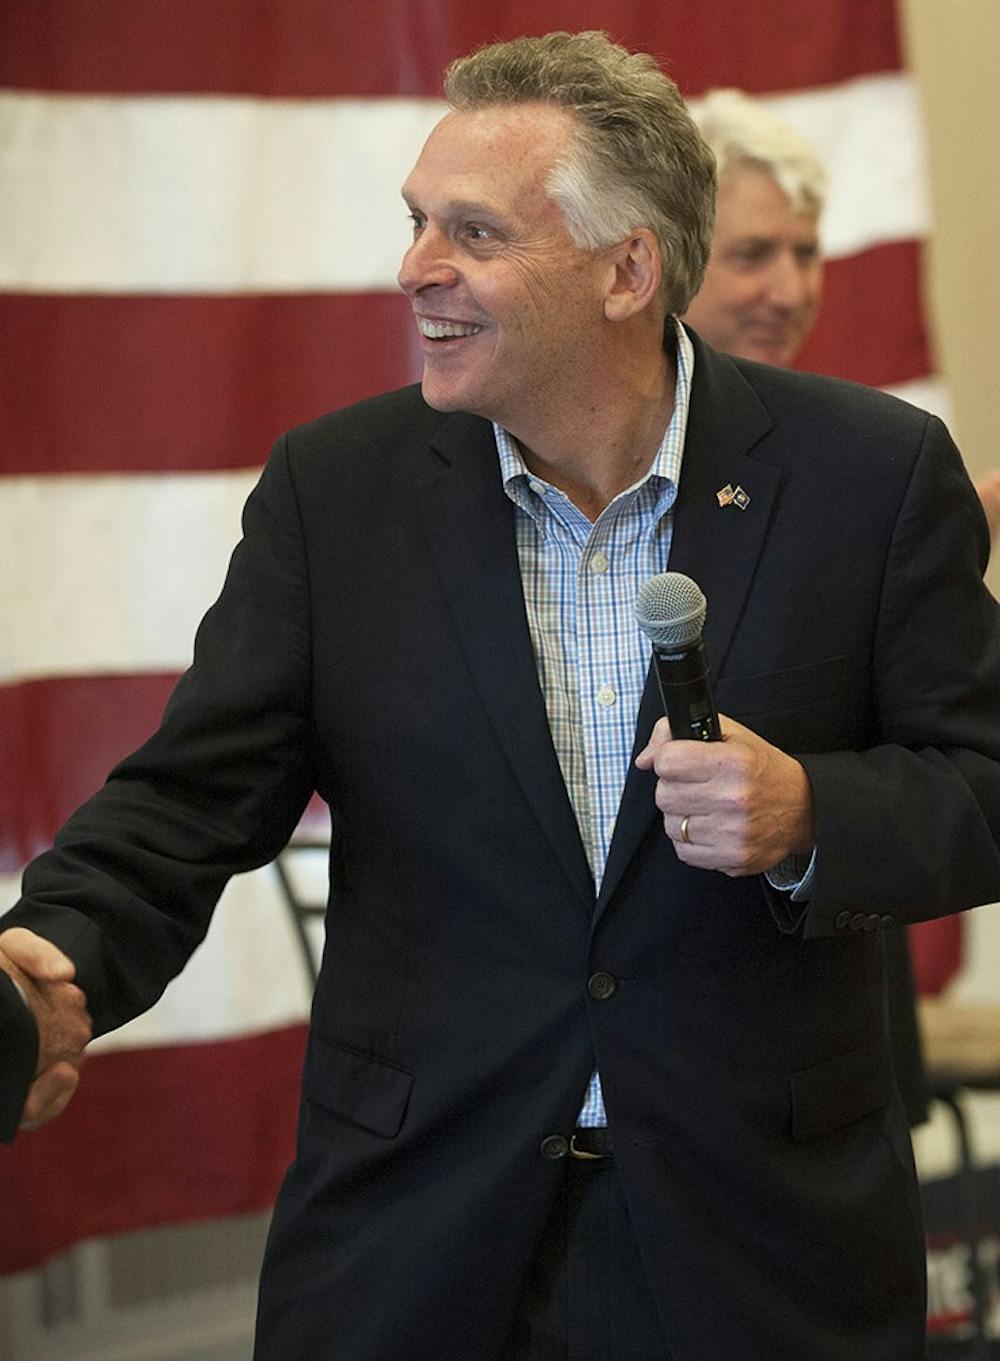 <p>“We will continue to support emerging sectors that are pushing the boundaries of exciting research and development to help build the new Virginia economy,” McAuliffe said in the press release.</p>